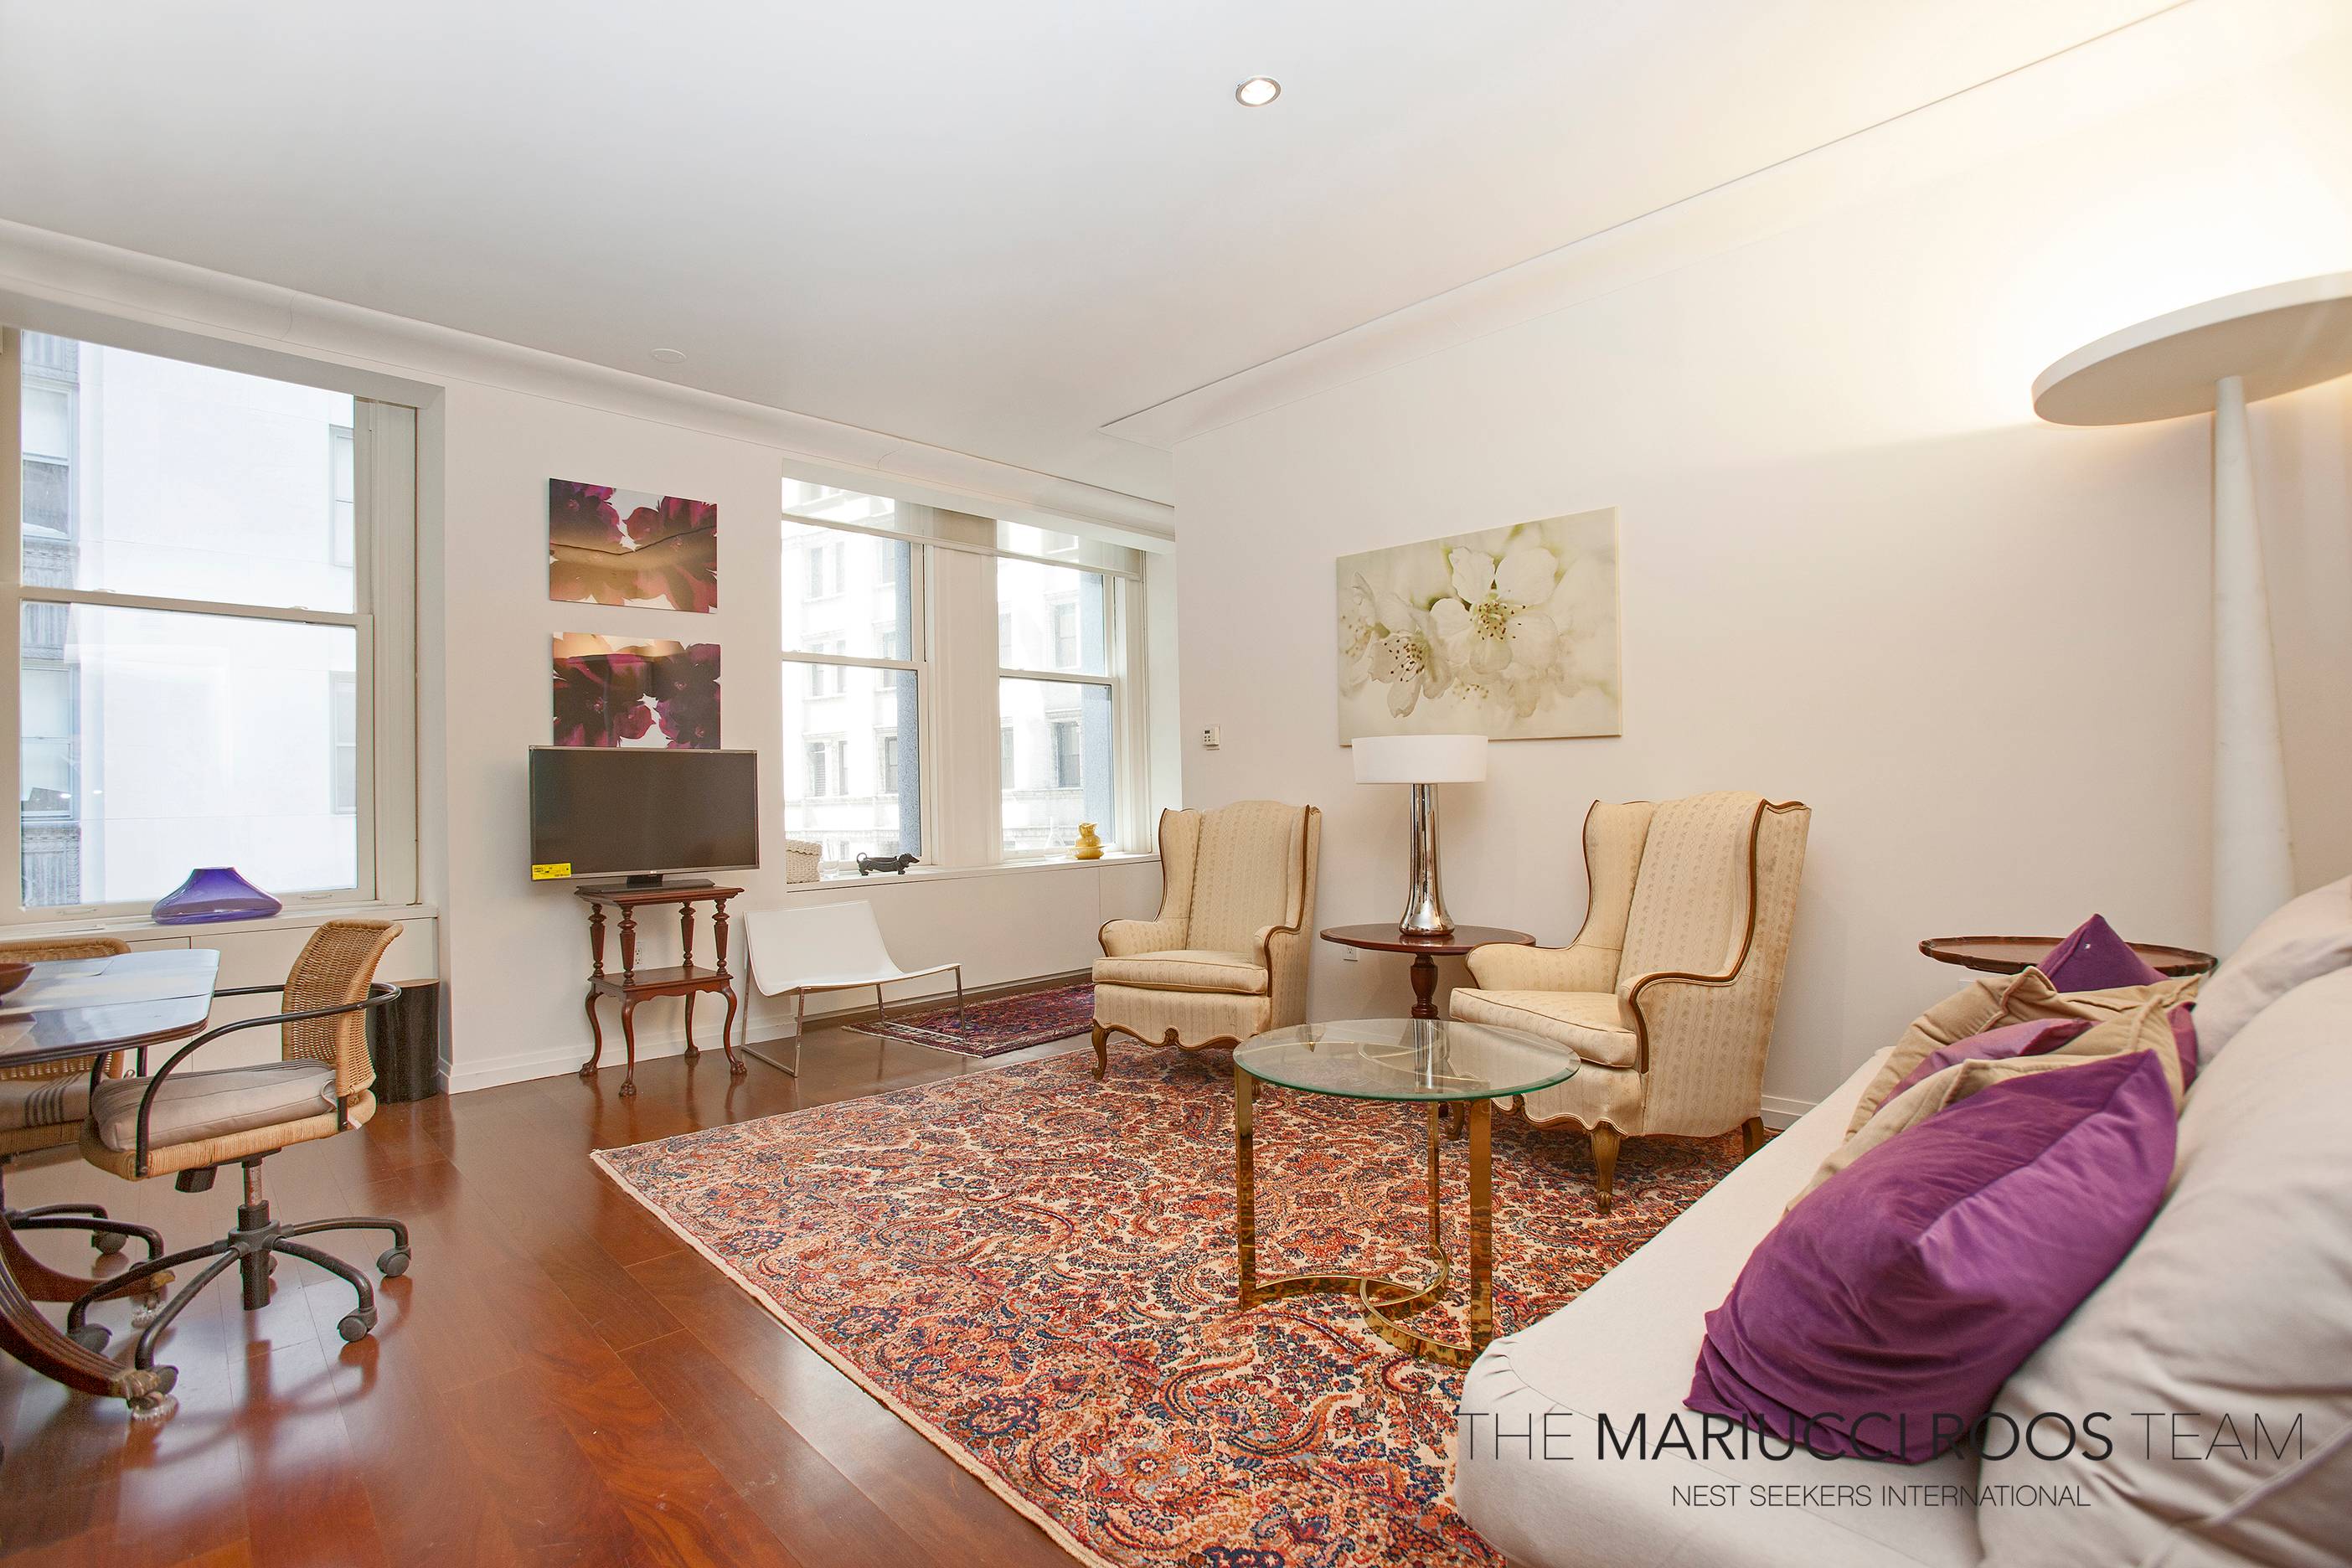  HUGE 1BD at CIPRIANI'S DOWNTOWN 55 WALL STREET! FULL-SERVICE LUXURY!